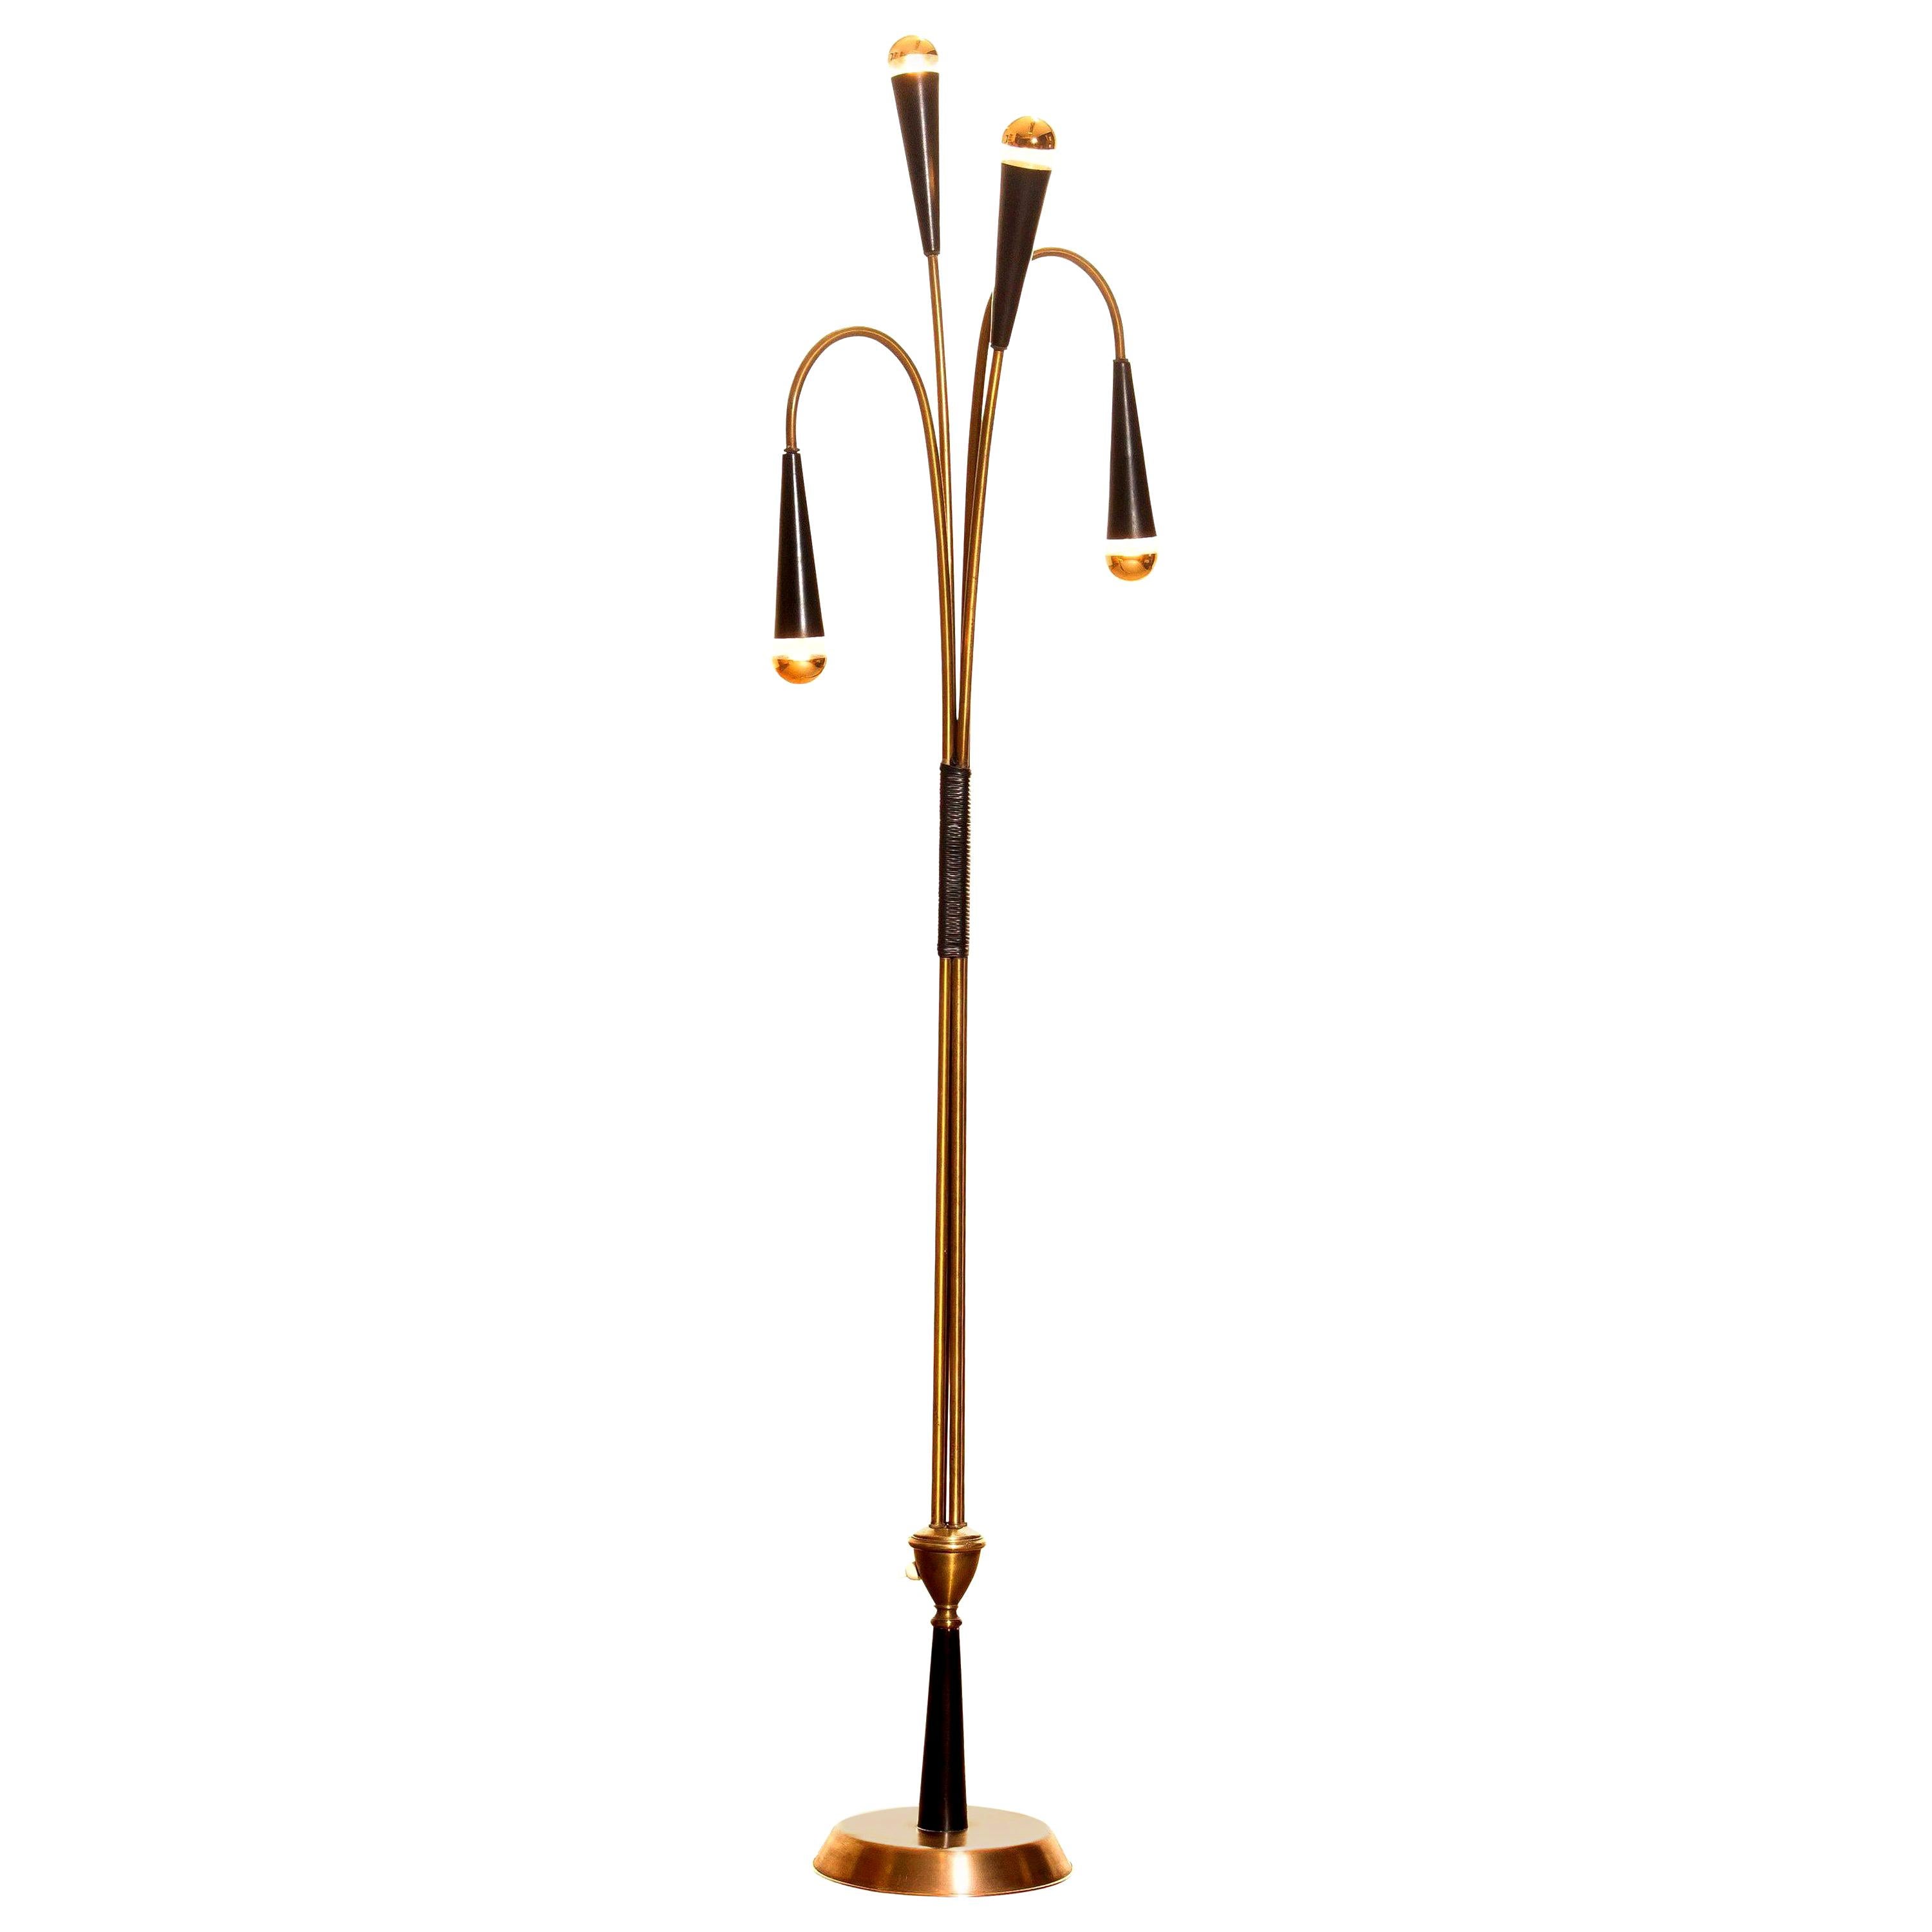 Beautiful and rare floor lamp made by Lumi.
Designed by Oscar Torlasco.
This lamp is made of brass with black lacquered metal details.
It is in an original condition and technical 100%.
Period: 1960s.
Dimensions: H 140 cm, W 39 cm.